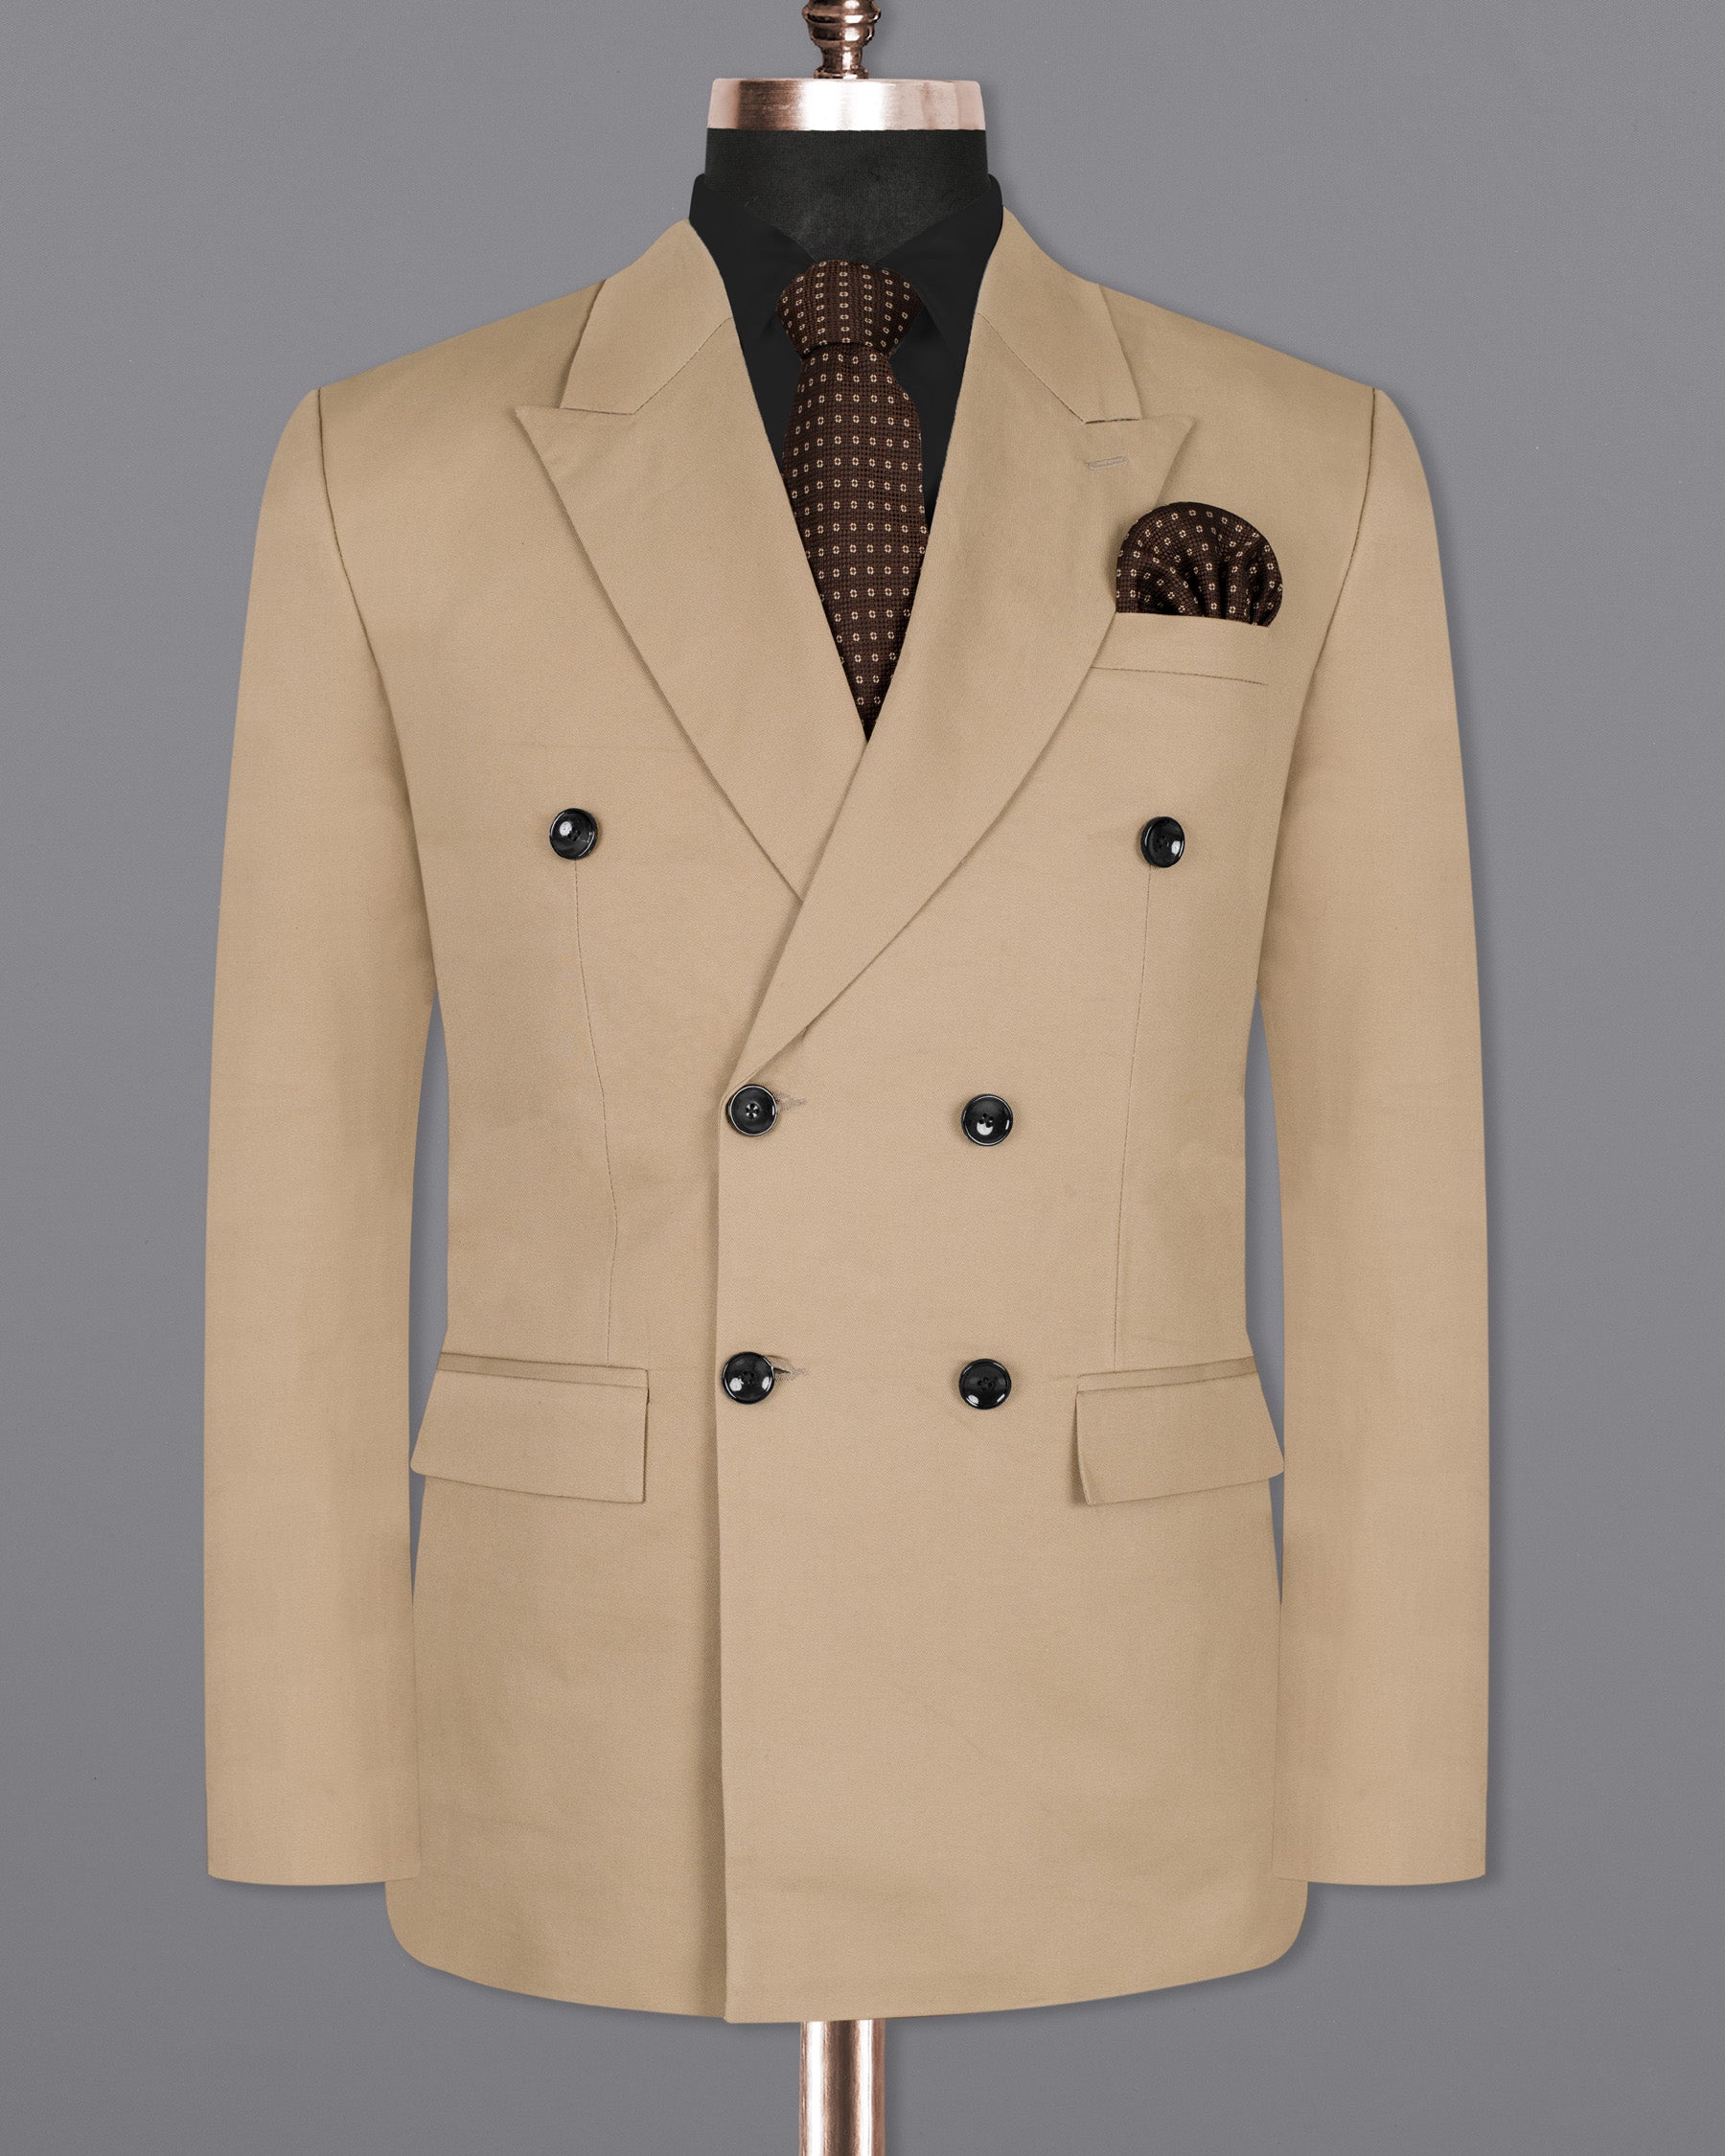 Coral Reef Double Breasted Wool Rich Blazer